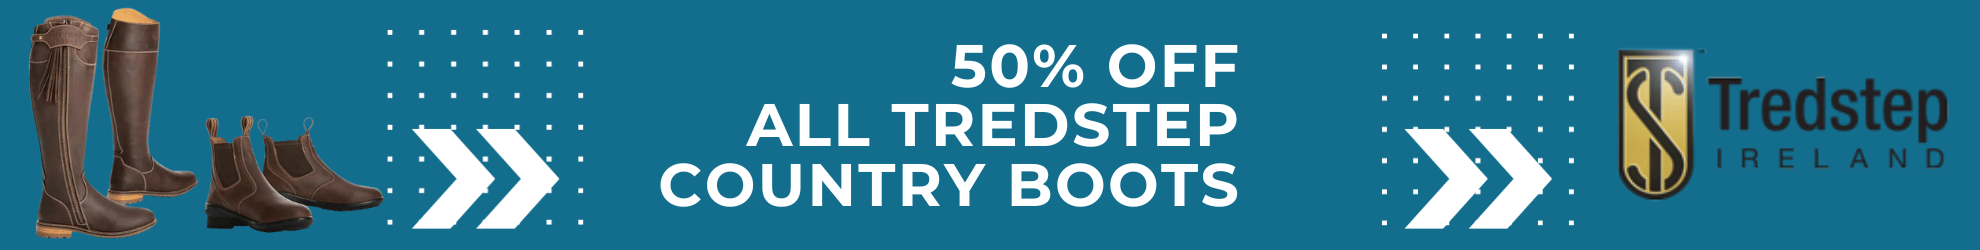 Tredstep Country Boots - 50% Offs